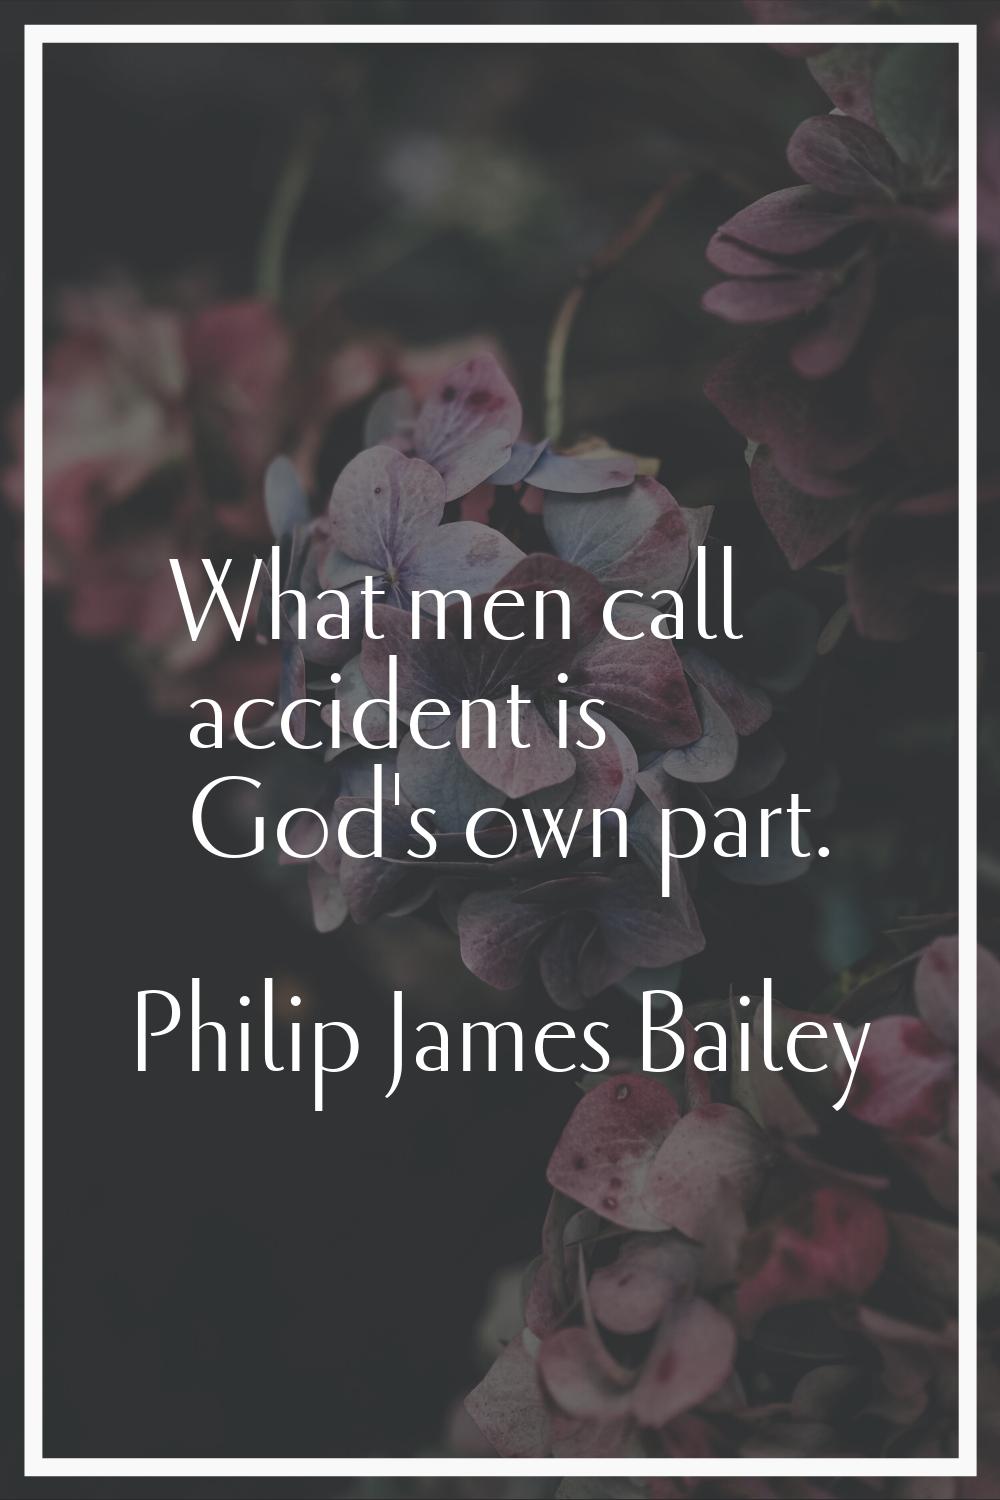 What men call accident is God's own part.